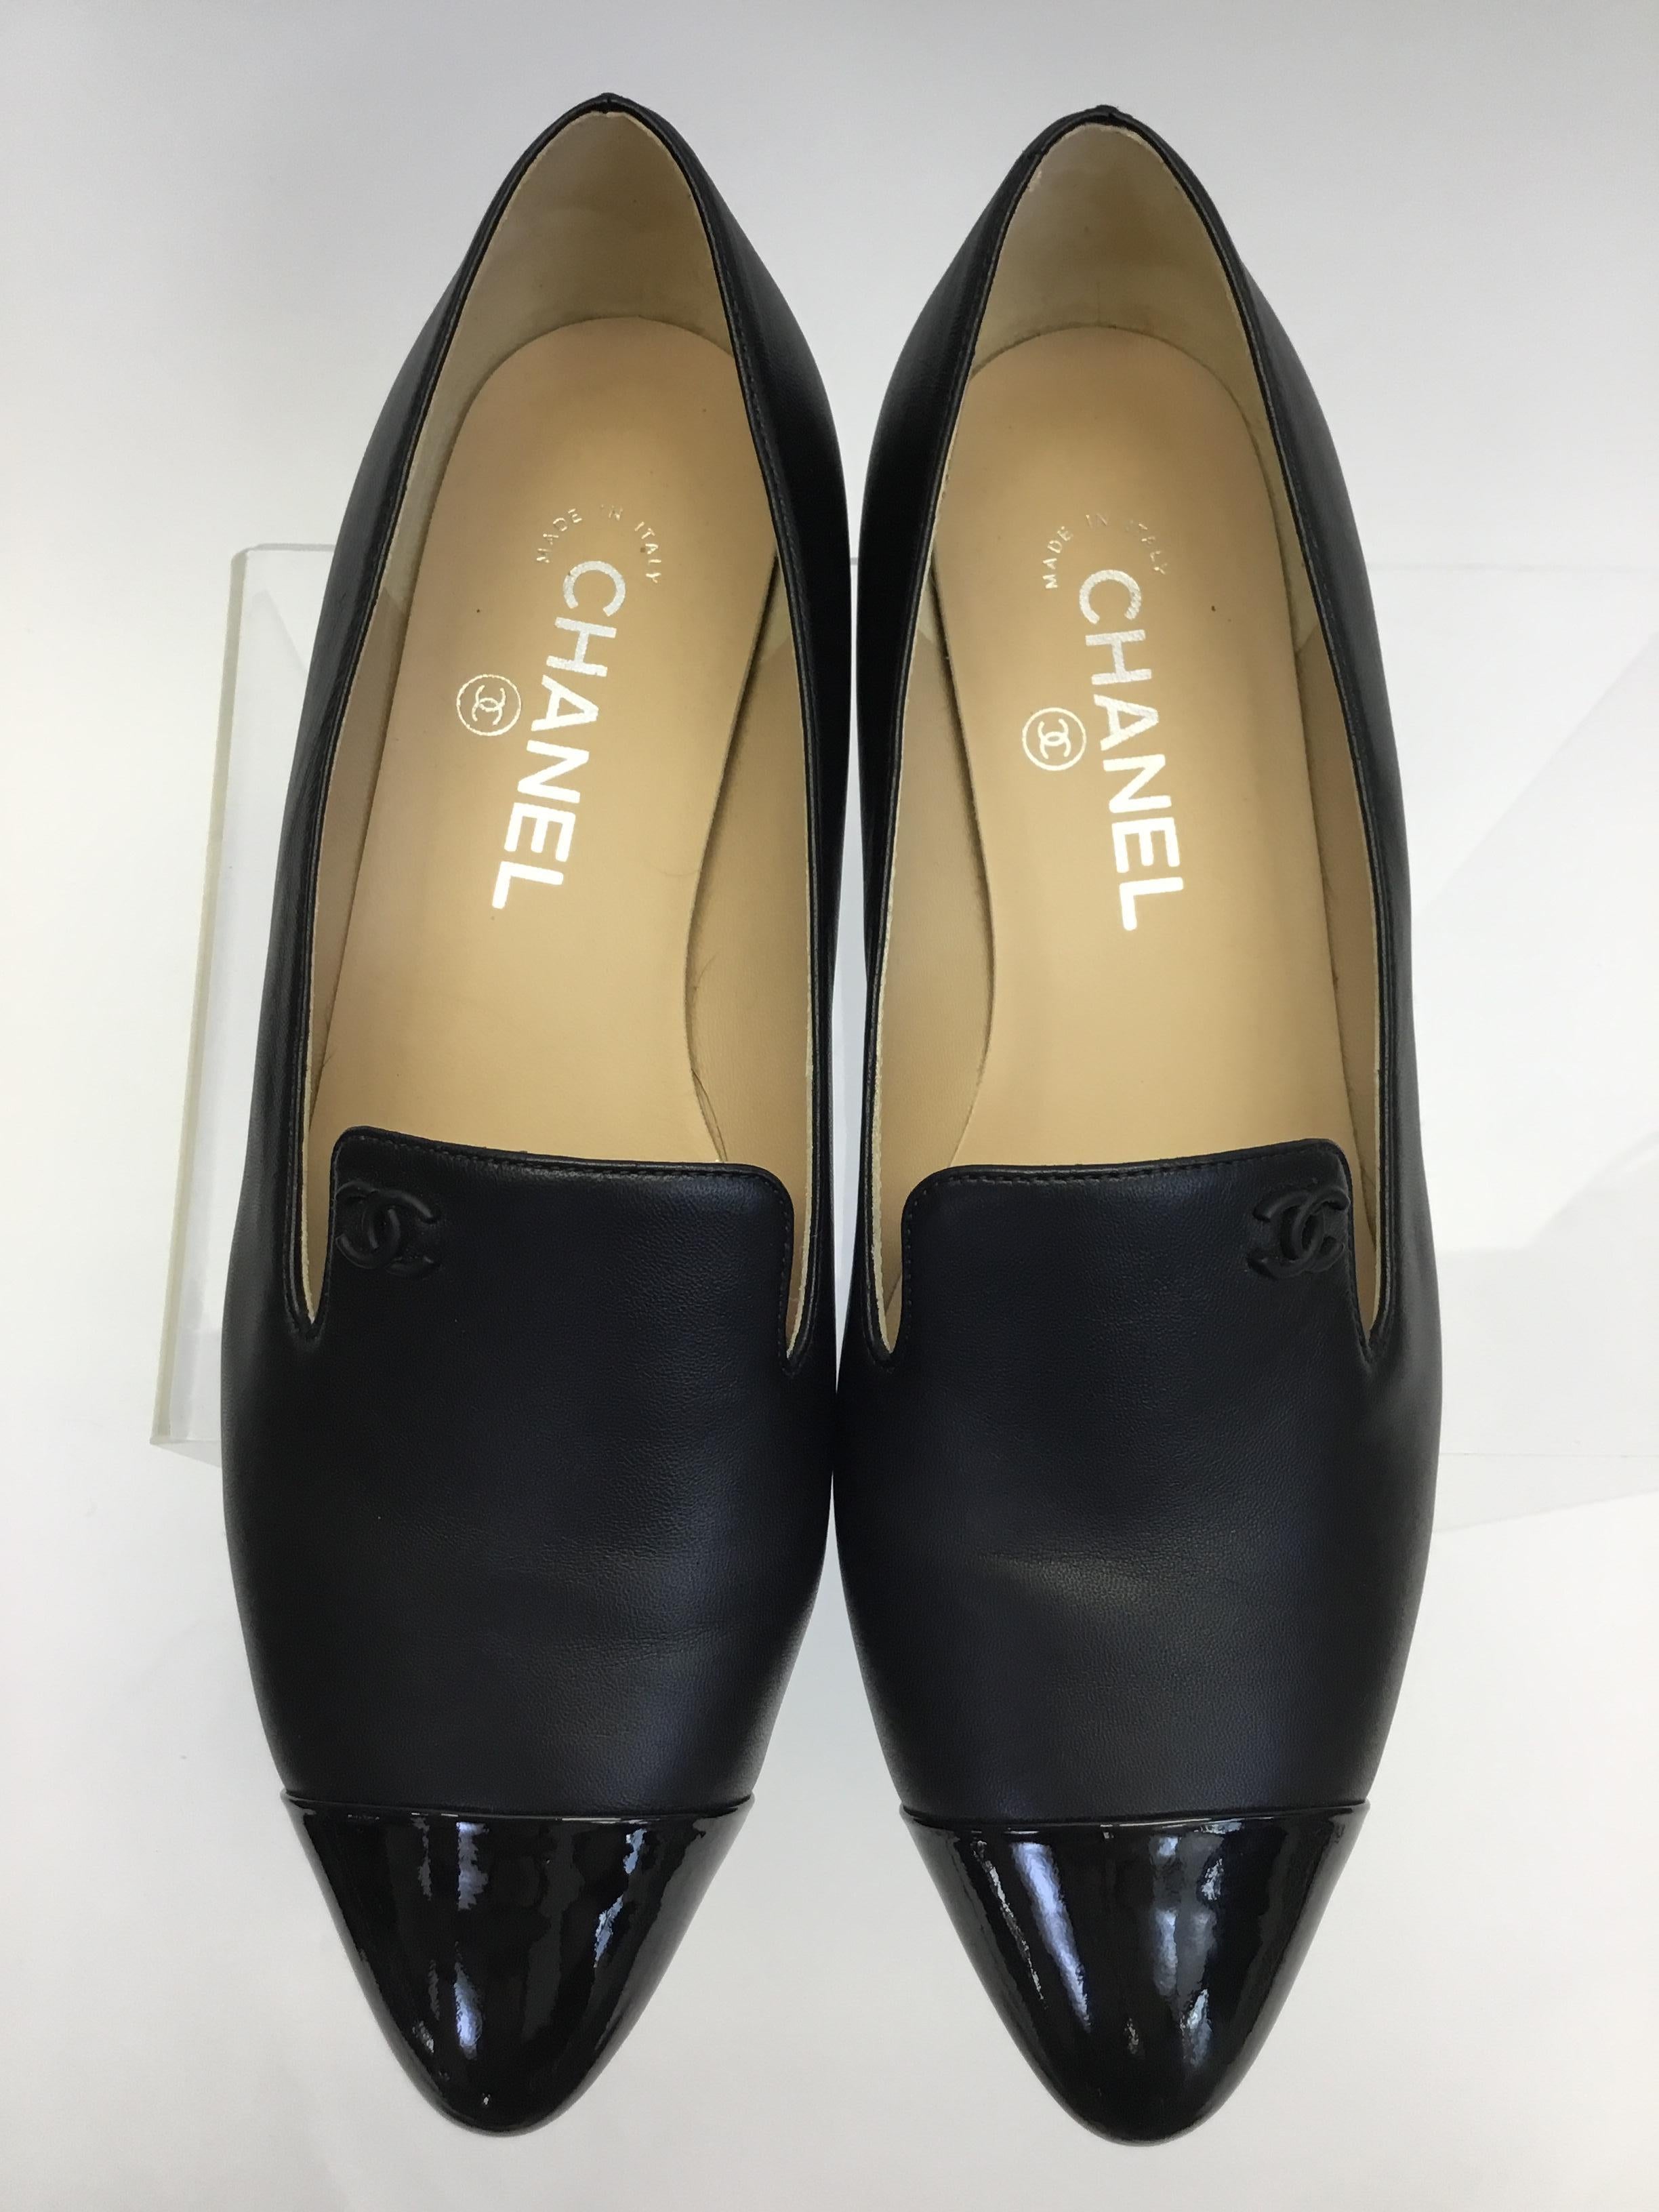 Chanel Black Leather Loafers NIB For Sale 1